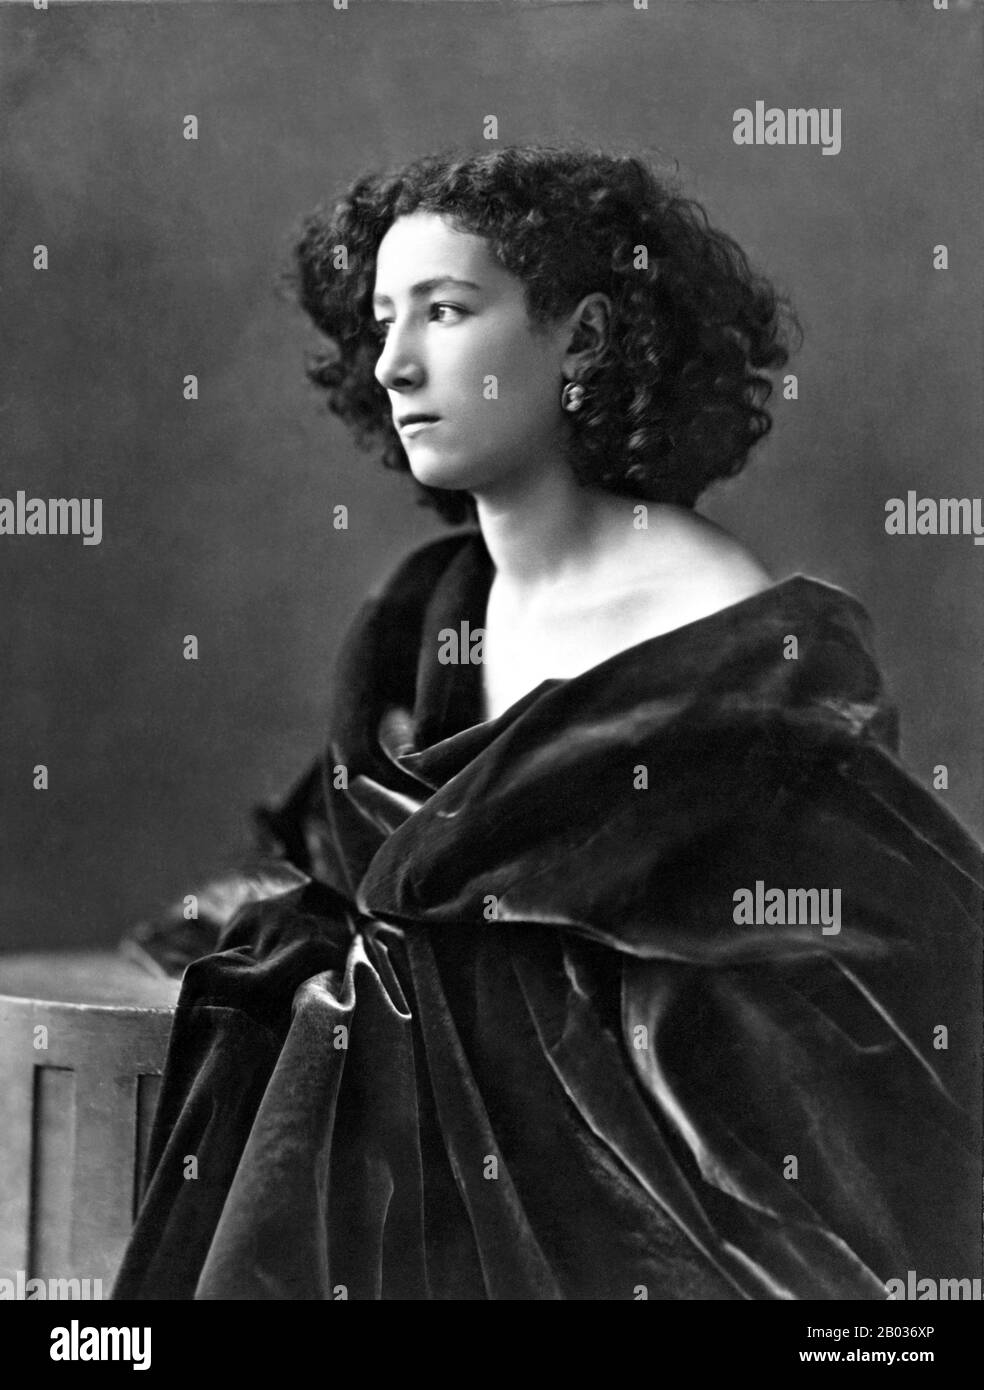 Sarah Bernhardt (23 October 1844 – 26 March 1923) was a French stage and early film actress. She was referred to as 'the most famous actress the world has ever known', and is regarded as one of the finest actors of all time.  Bernhardt made her fame on the stages of France in the 1870s, at the beginning of the Belle Epoque period, and was soon in demand in Europe and the Americas. She developed a reputation as a sublime dramatic actress and tragedienne, earning the nickname 'The Divine Sarah'. In her later career she starred in some of the earliest films ever produced. Stock Photo